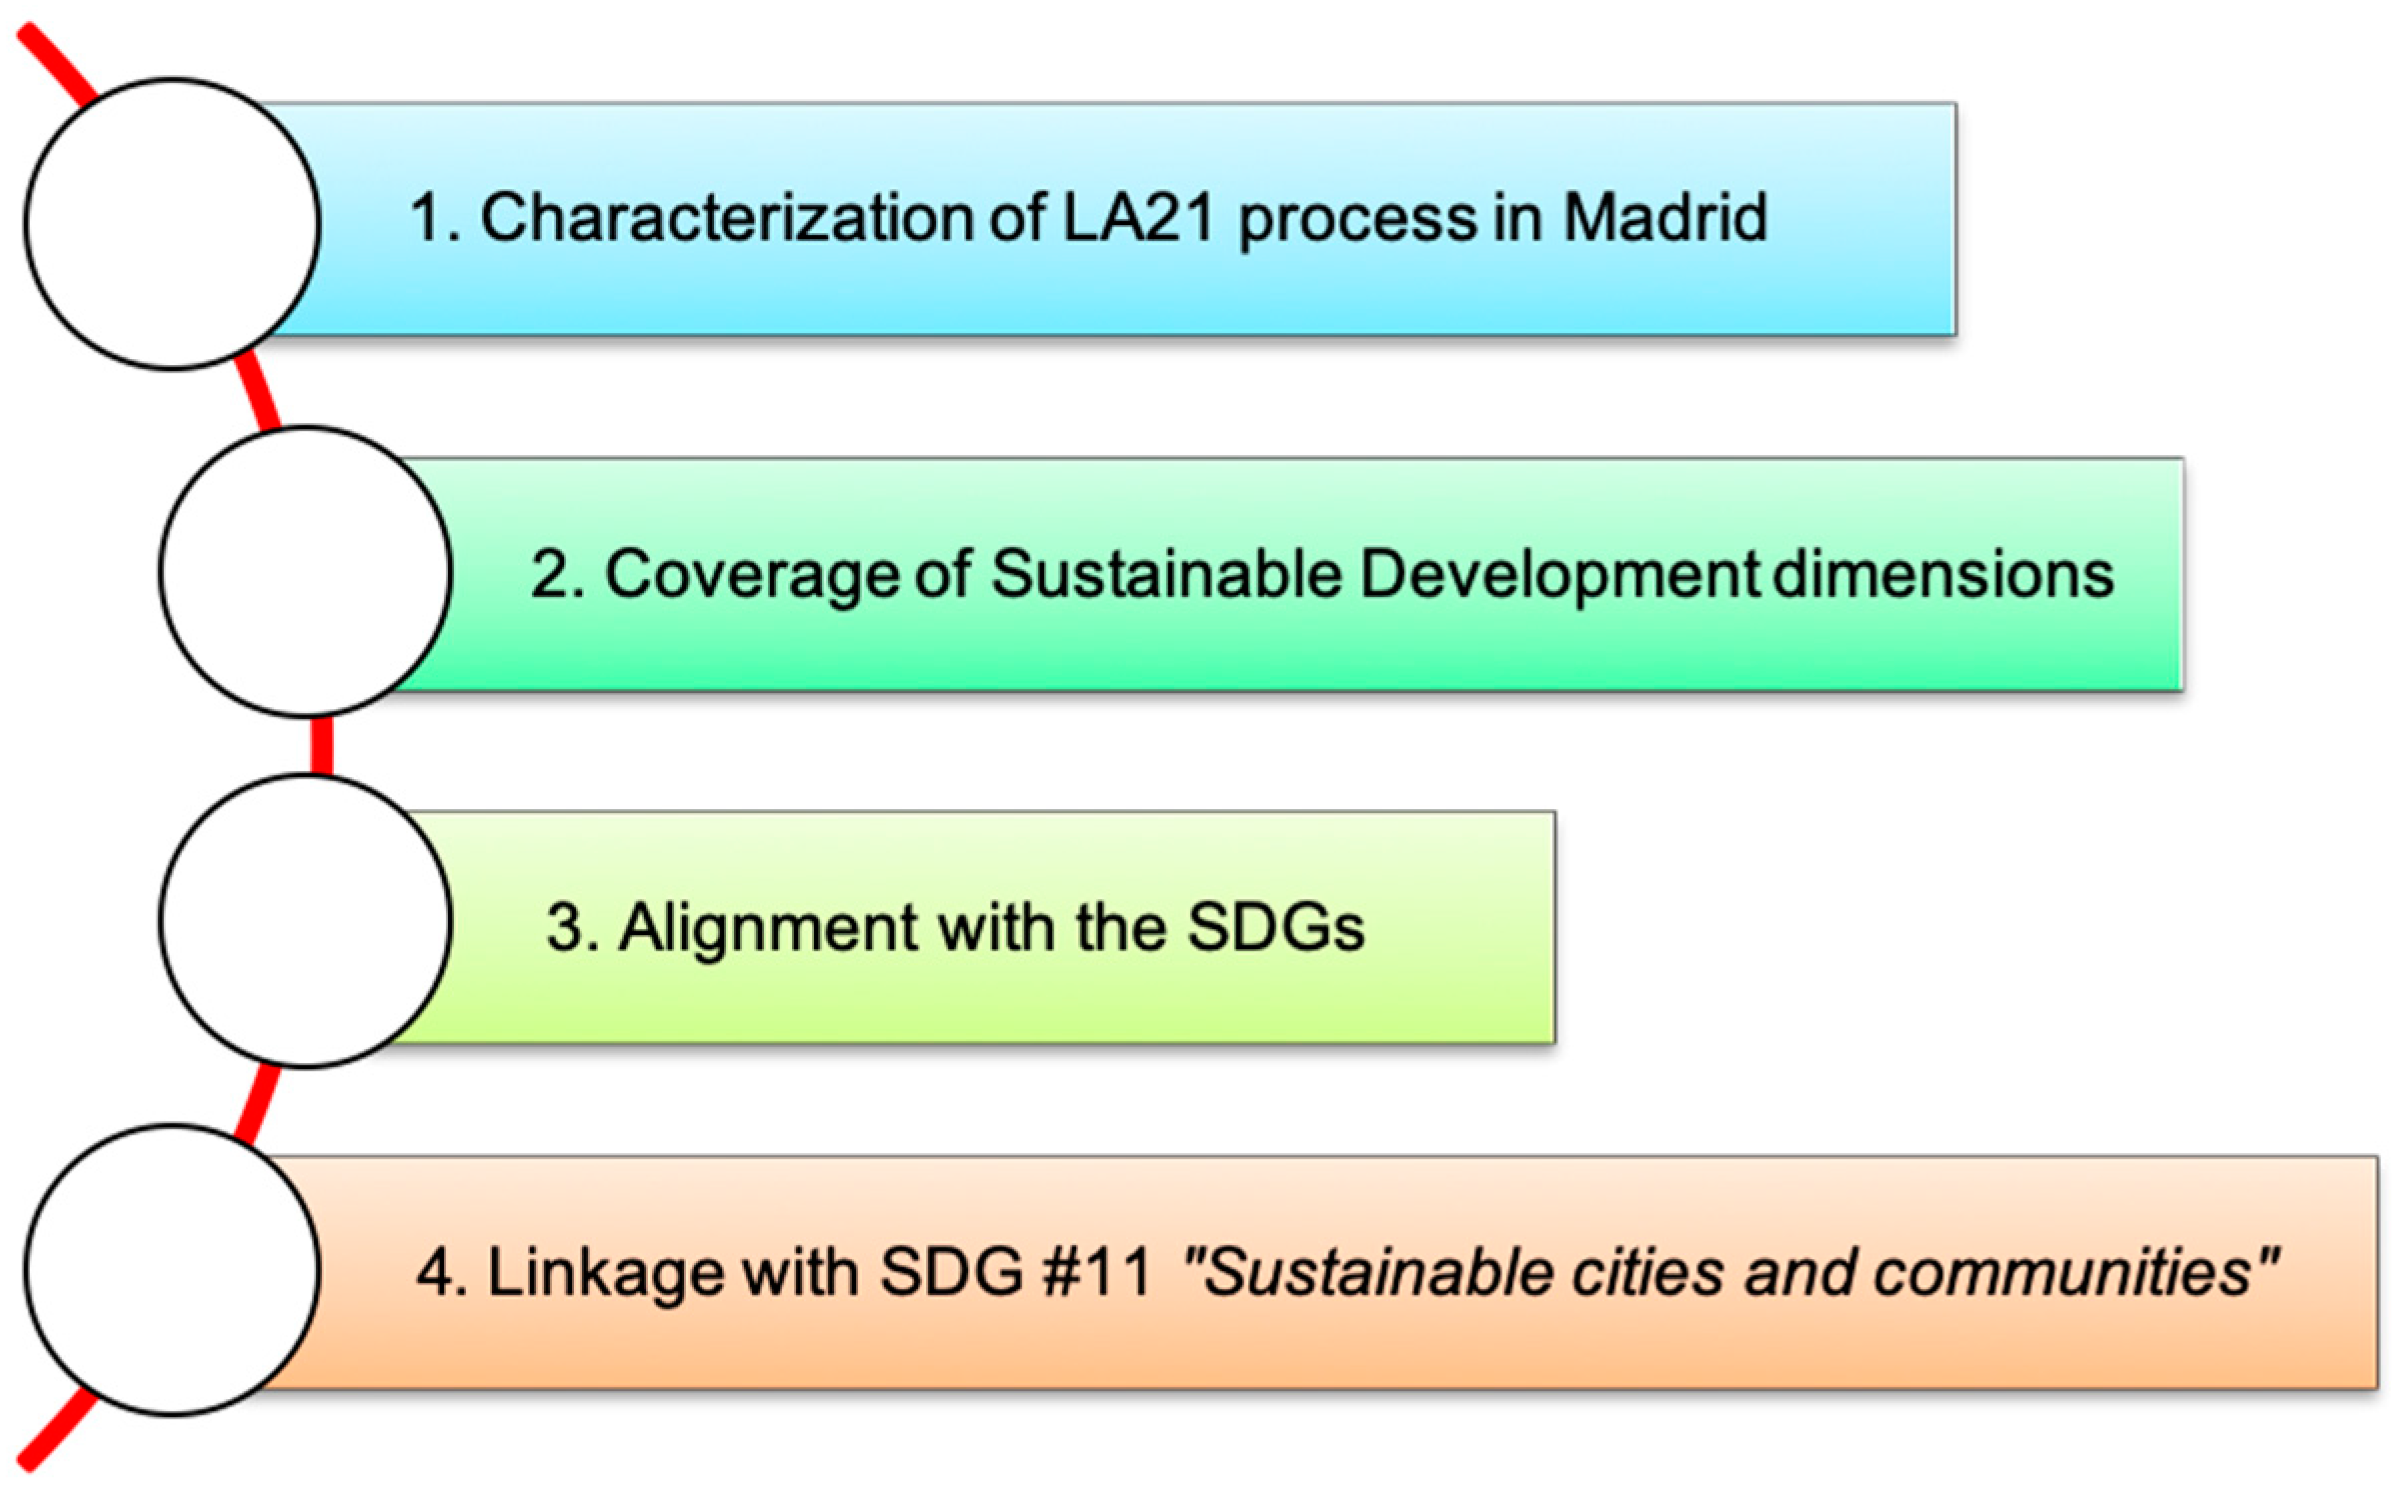 IJERPH | Free Full-Text | Analysis of the Local Agenda 21 in Madrid  Compared with Other Global Actions in Sustainable Development | HTML